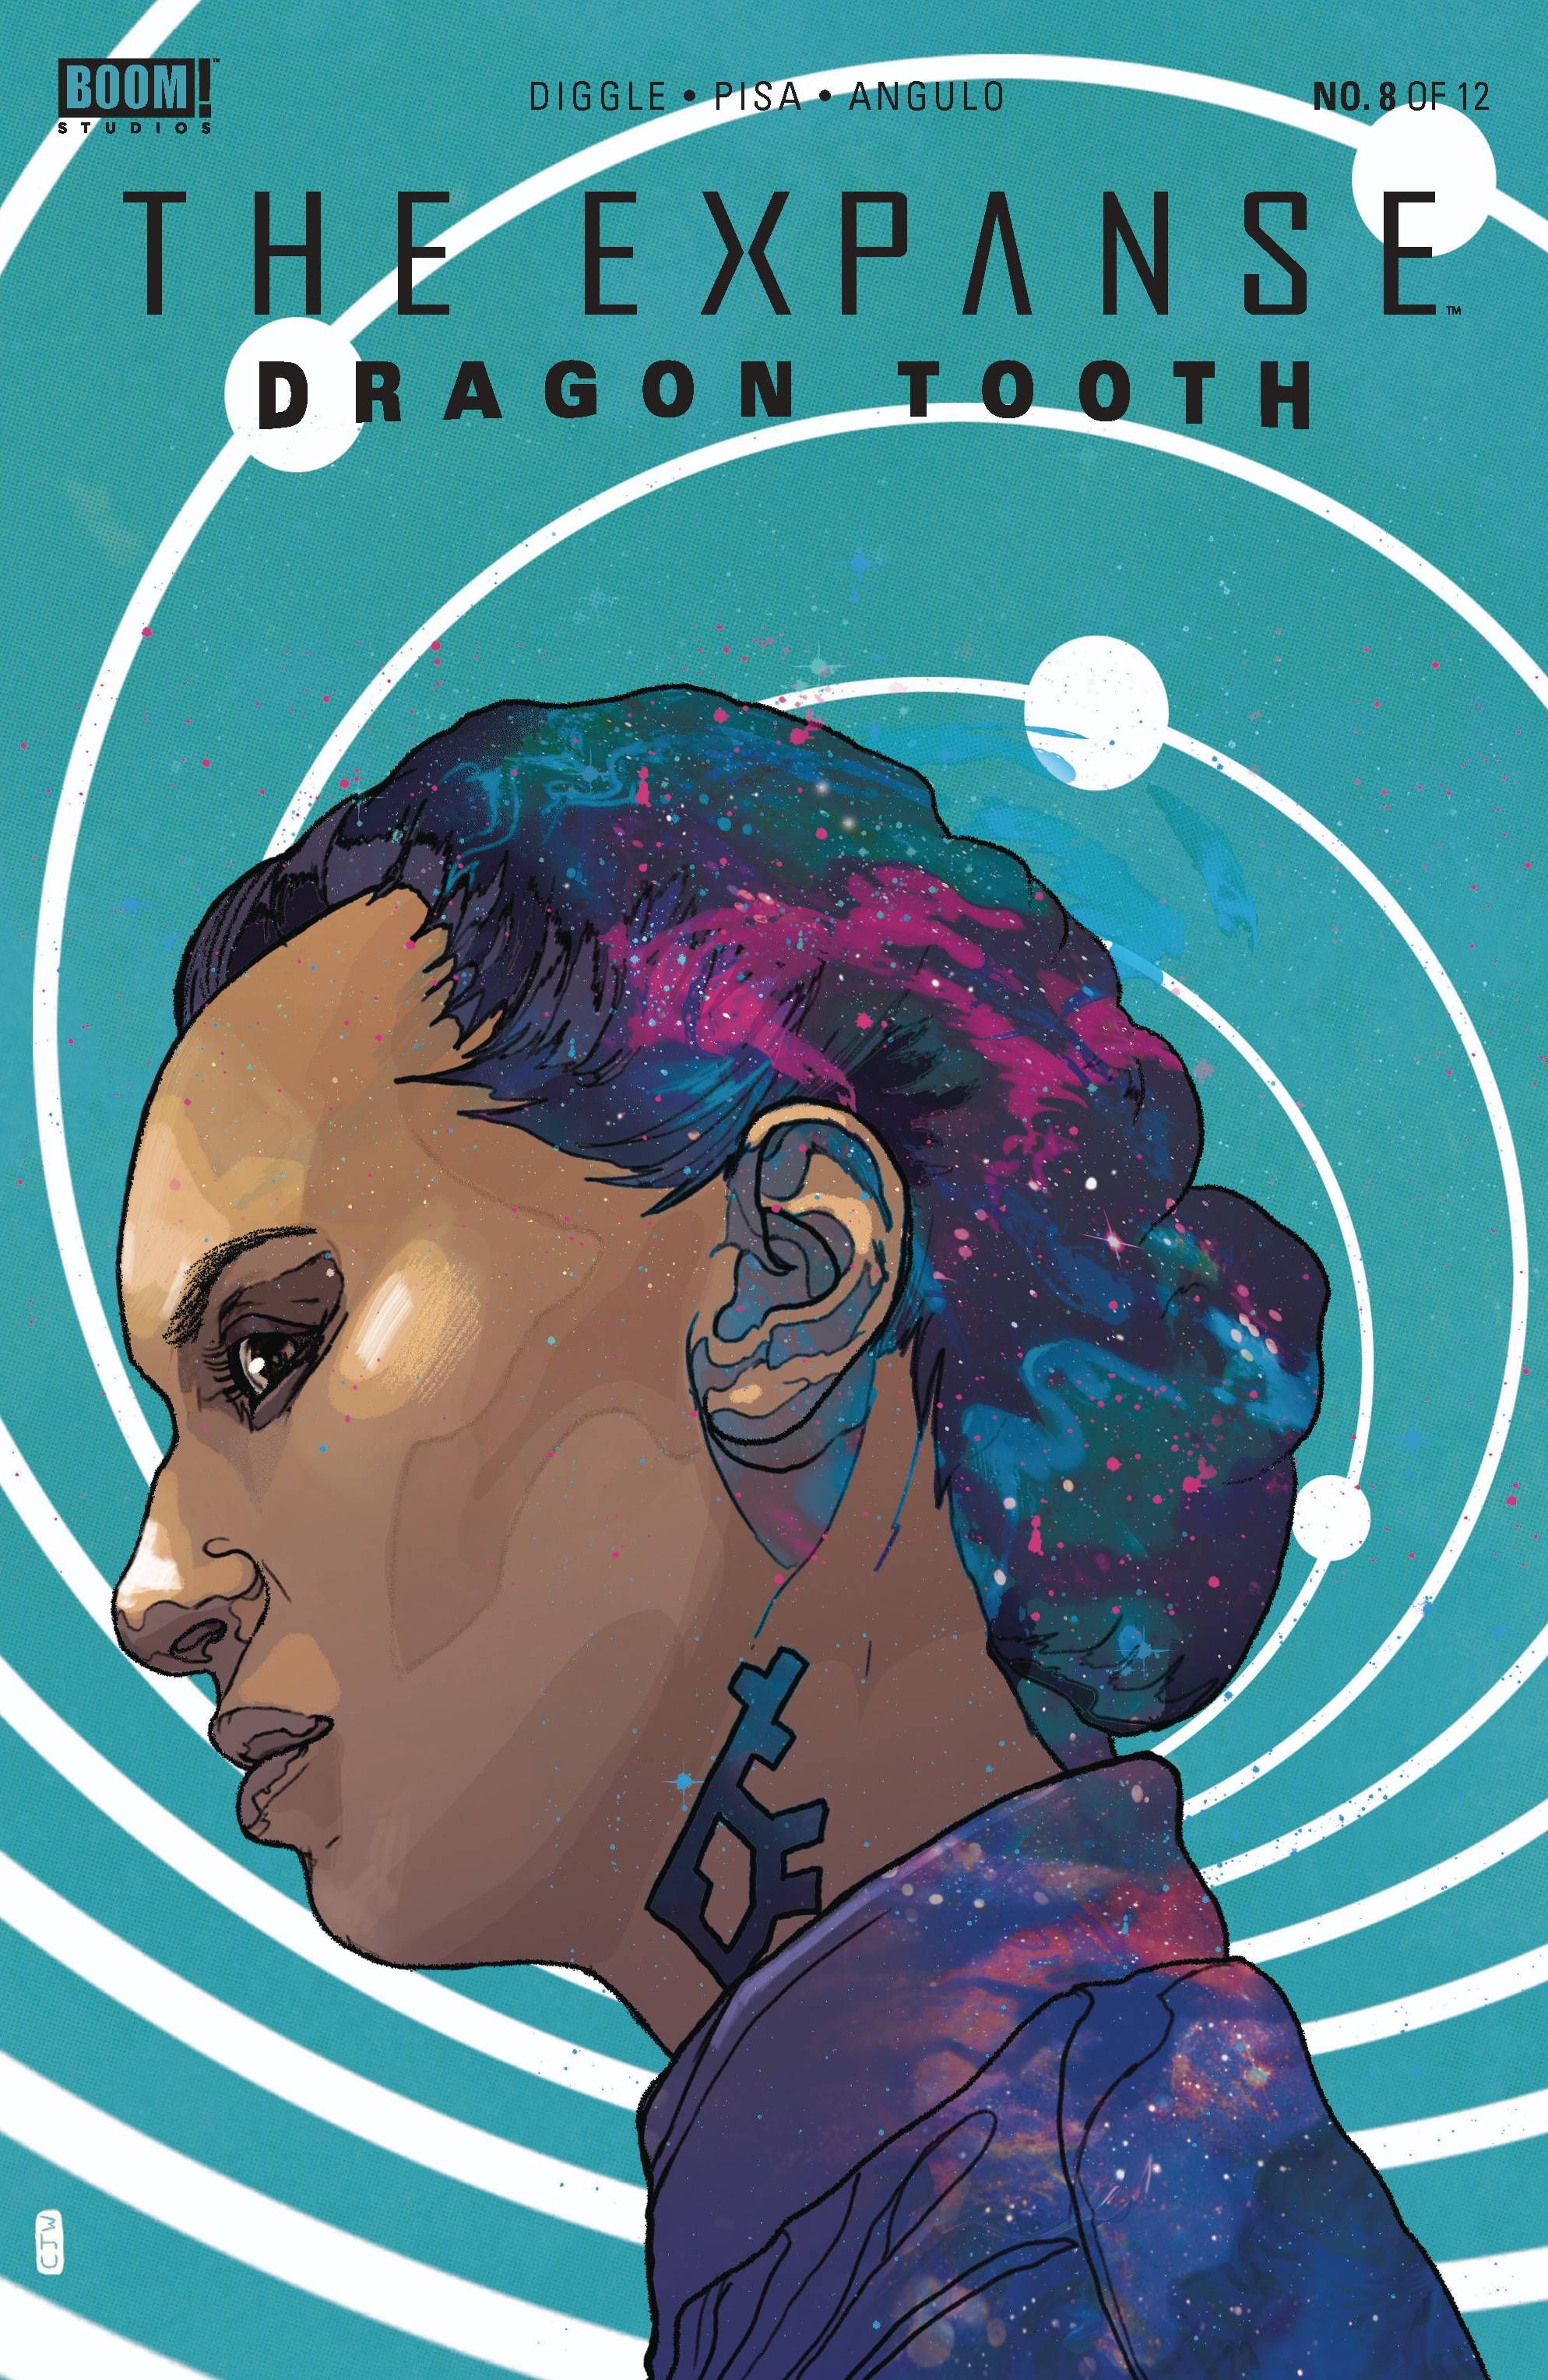 The Expanse: Dragon Tooth #8 Comic